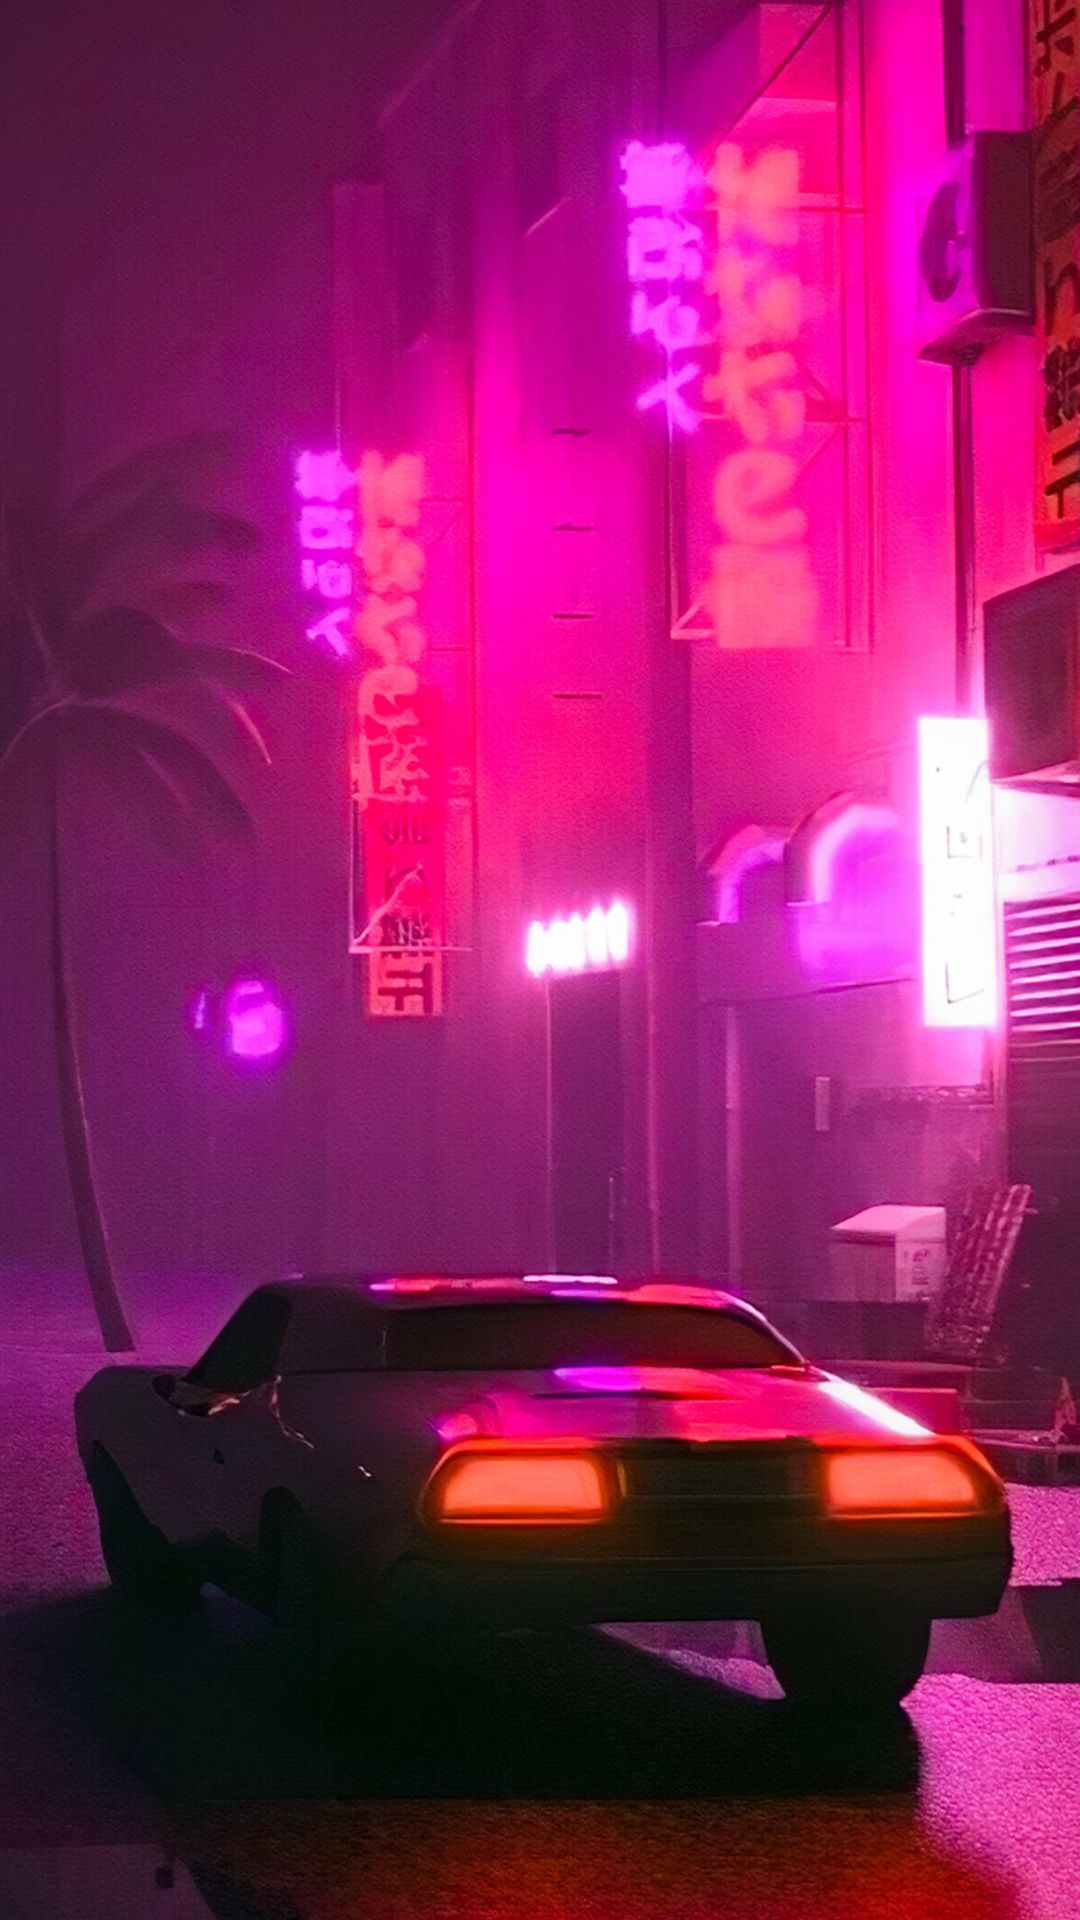 Synthwave Car On Street iPhone 6s, 6 Plus, Pixel xl